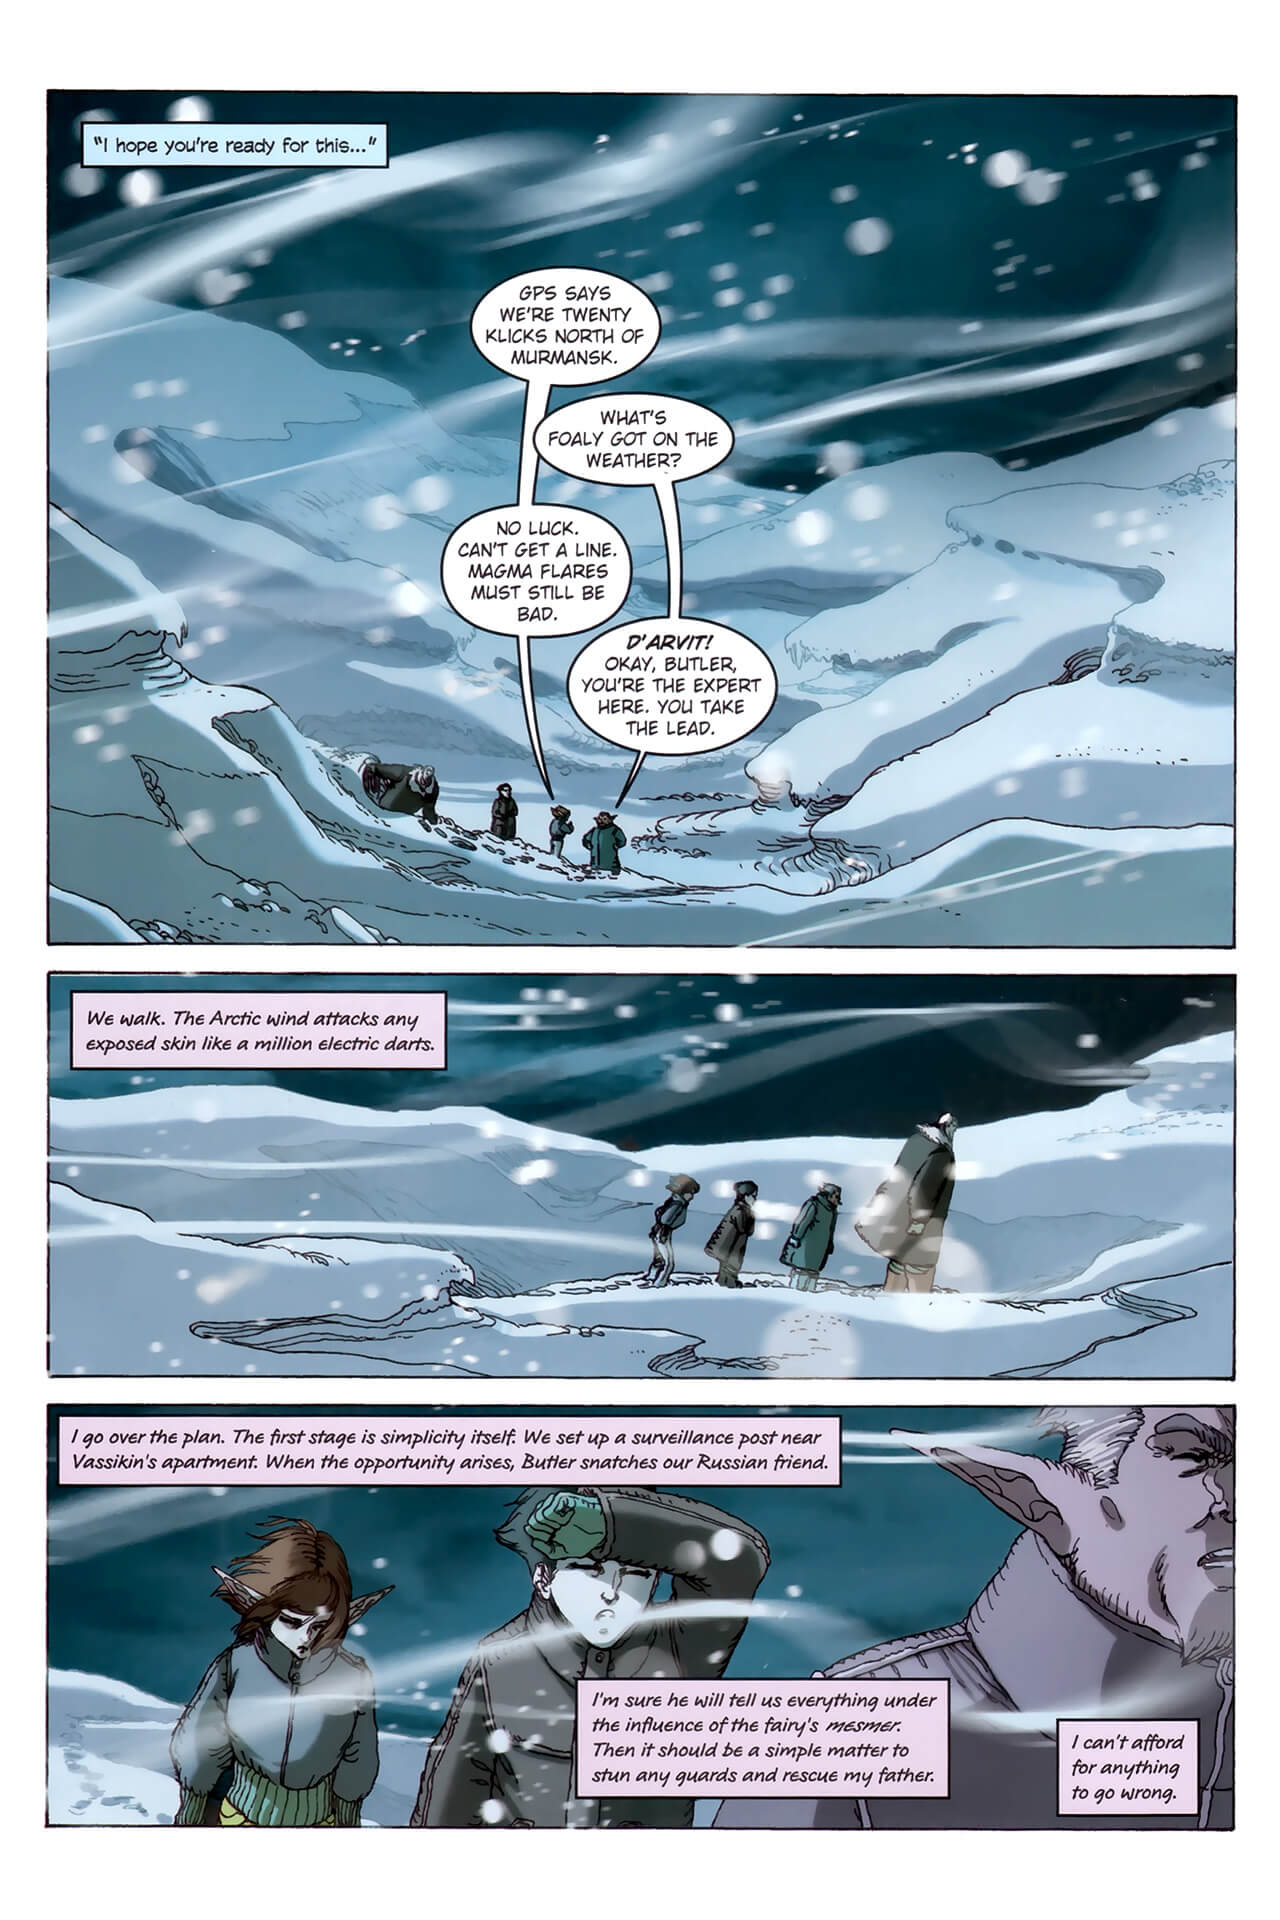 page 56 of artemis fowl the arctic incident graphic novel